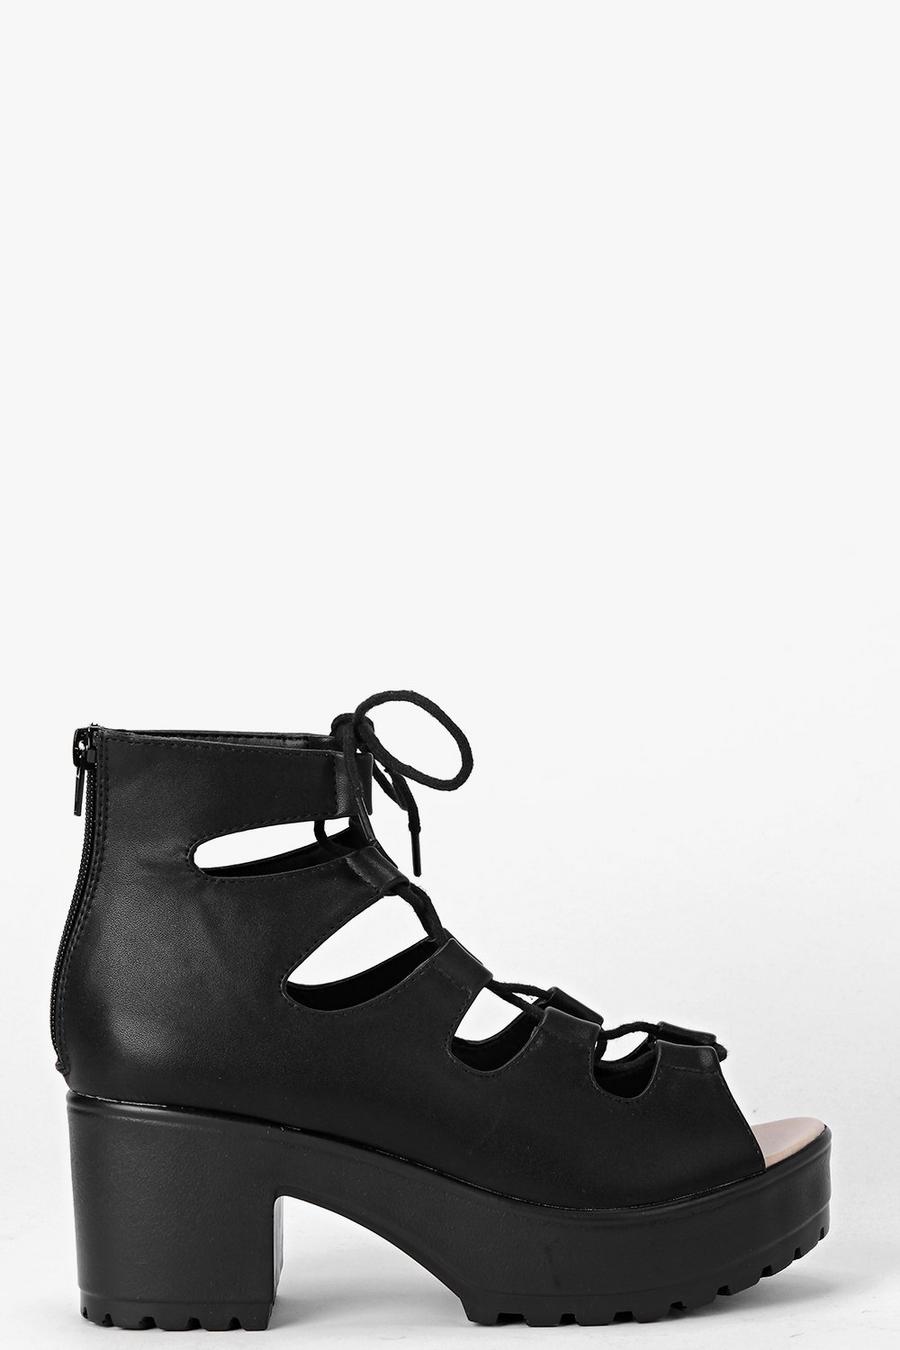 Black Cleated Peeptoe Lace Up Sandals image number 1